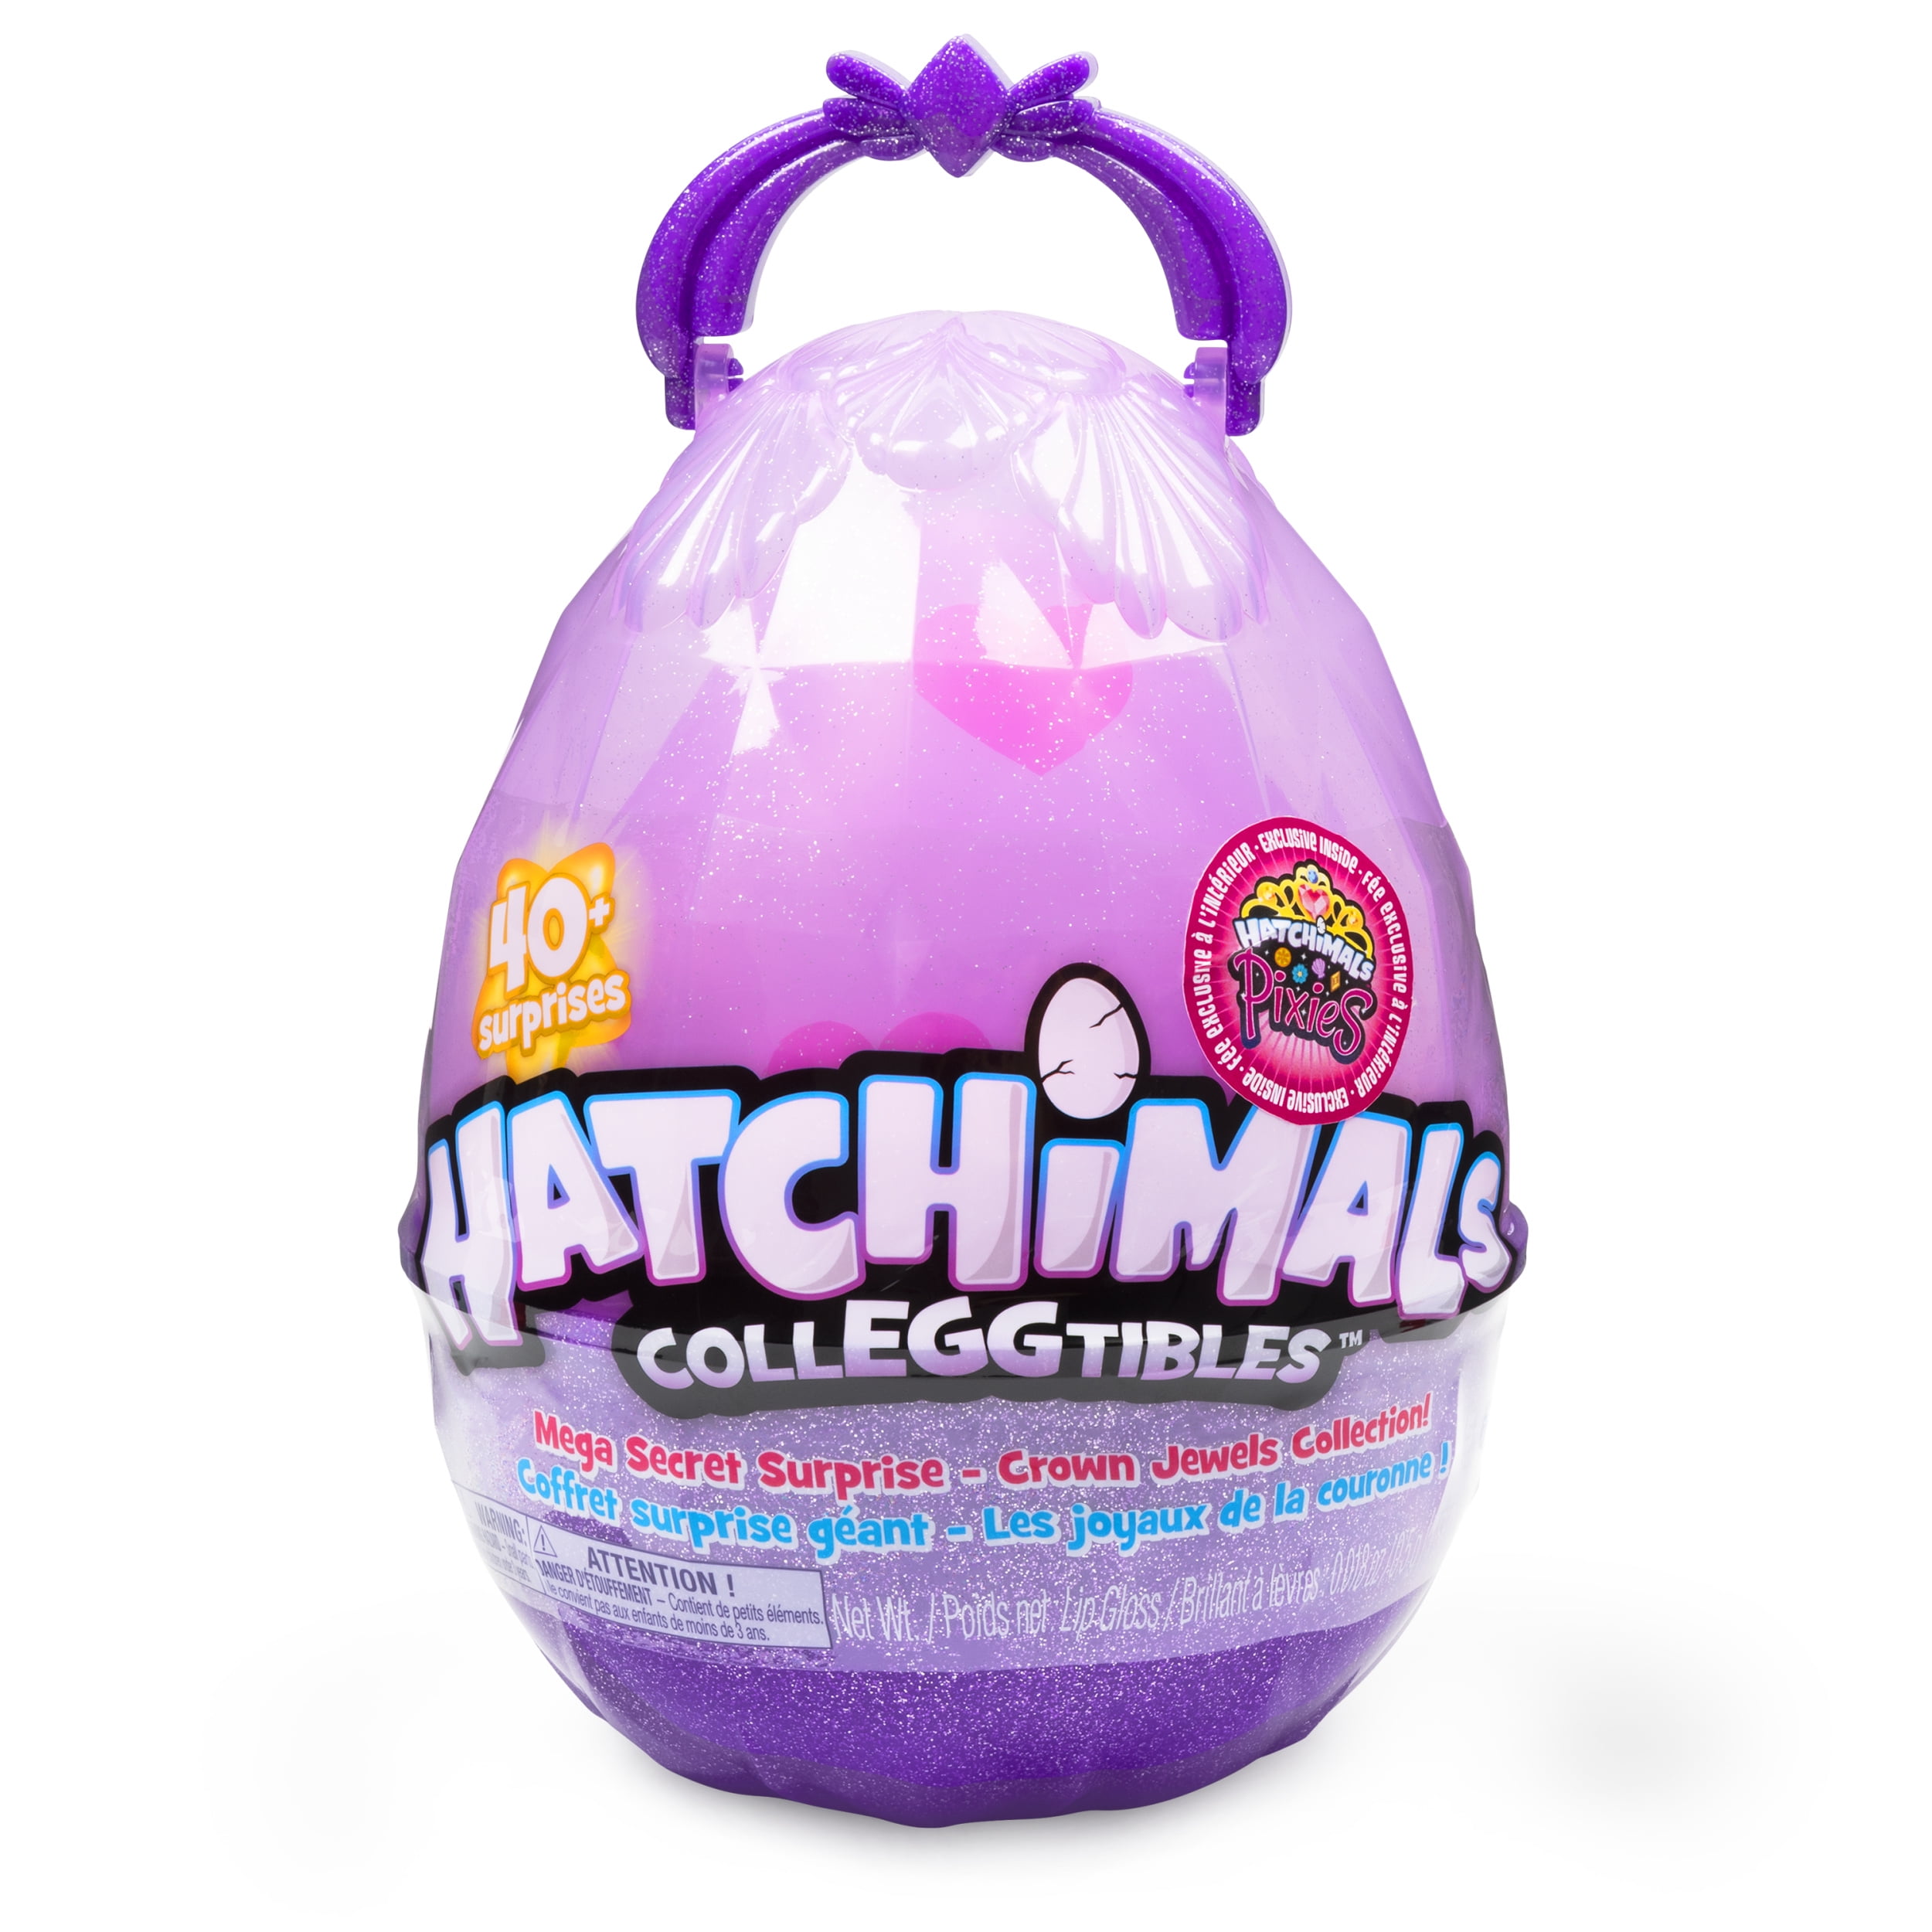 Want to win a Hatchimals Surprise toy? Enter here!